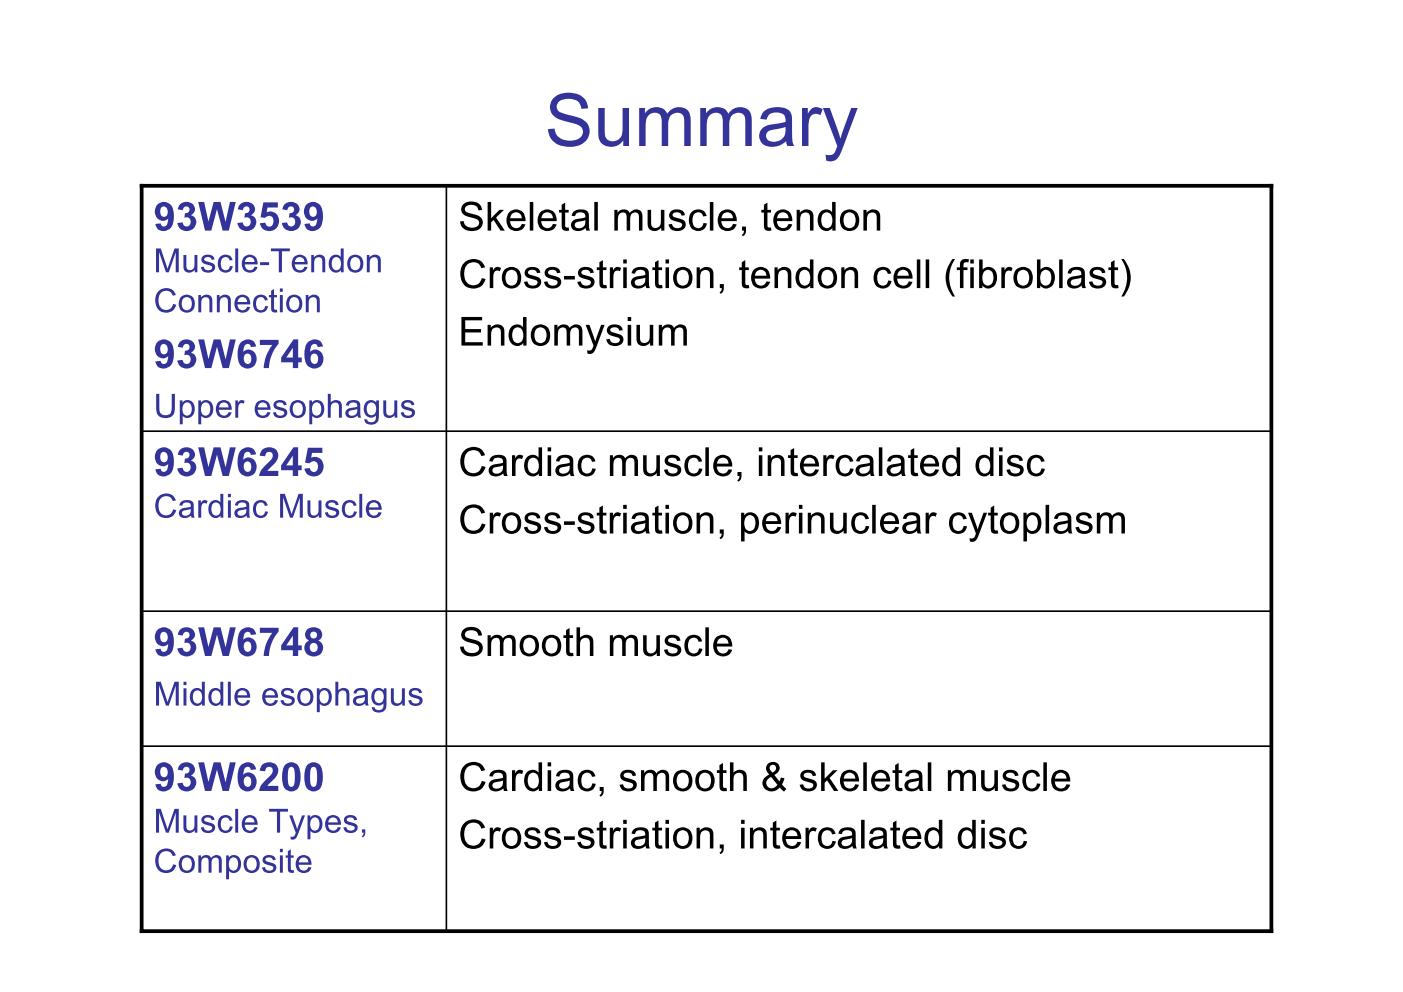 block6-2_15.jpg - Summary93W3539 Muscle-Tendon Connection          93W6746 Upper esophagusSkeletal muscle, tendonCross-striation, tendon cell (fibroblast)Endomysium93W6245 Cardiac Muscle           Cardiac muscle, intercalated discCross-striation, perinuclear cytoplasm93W6748 Middle esophagus           Smooth muscle93W6200 Muscle Types, Composite          Cardiac, smooth & skeletal muscleCross-striation, intercalated disc